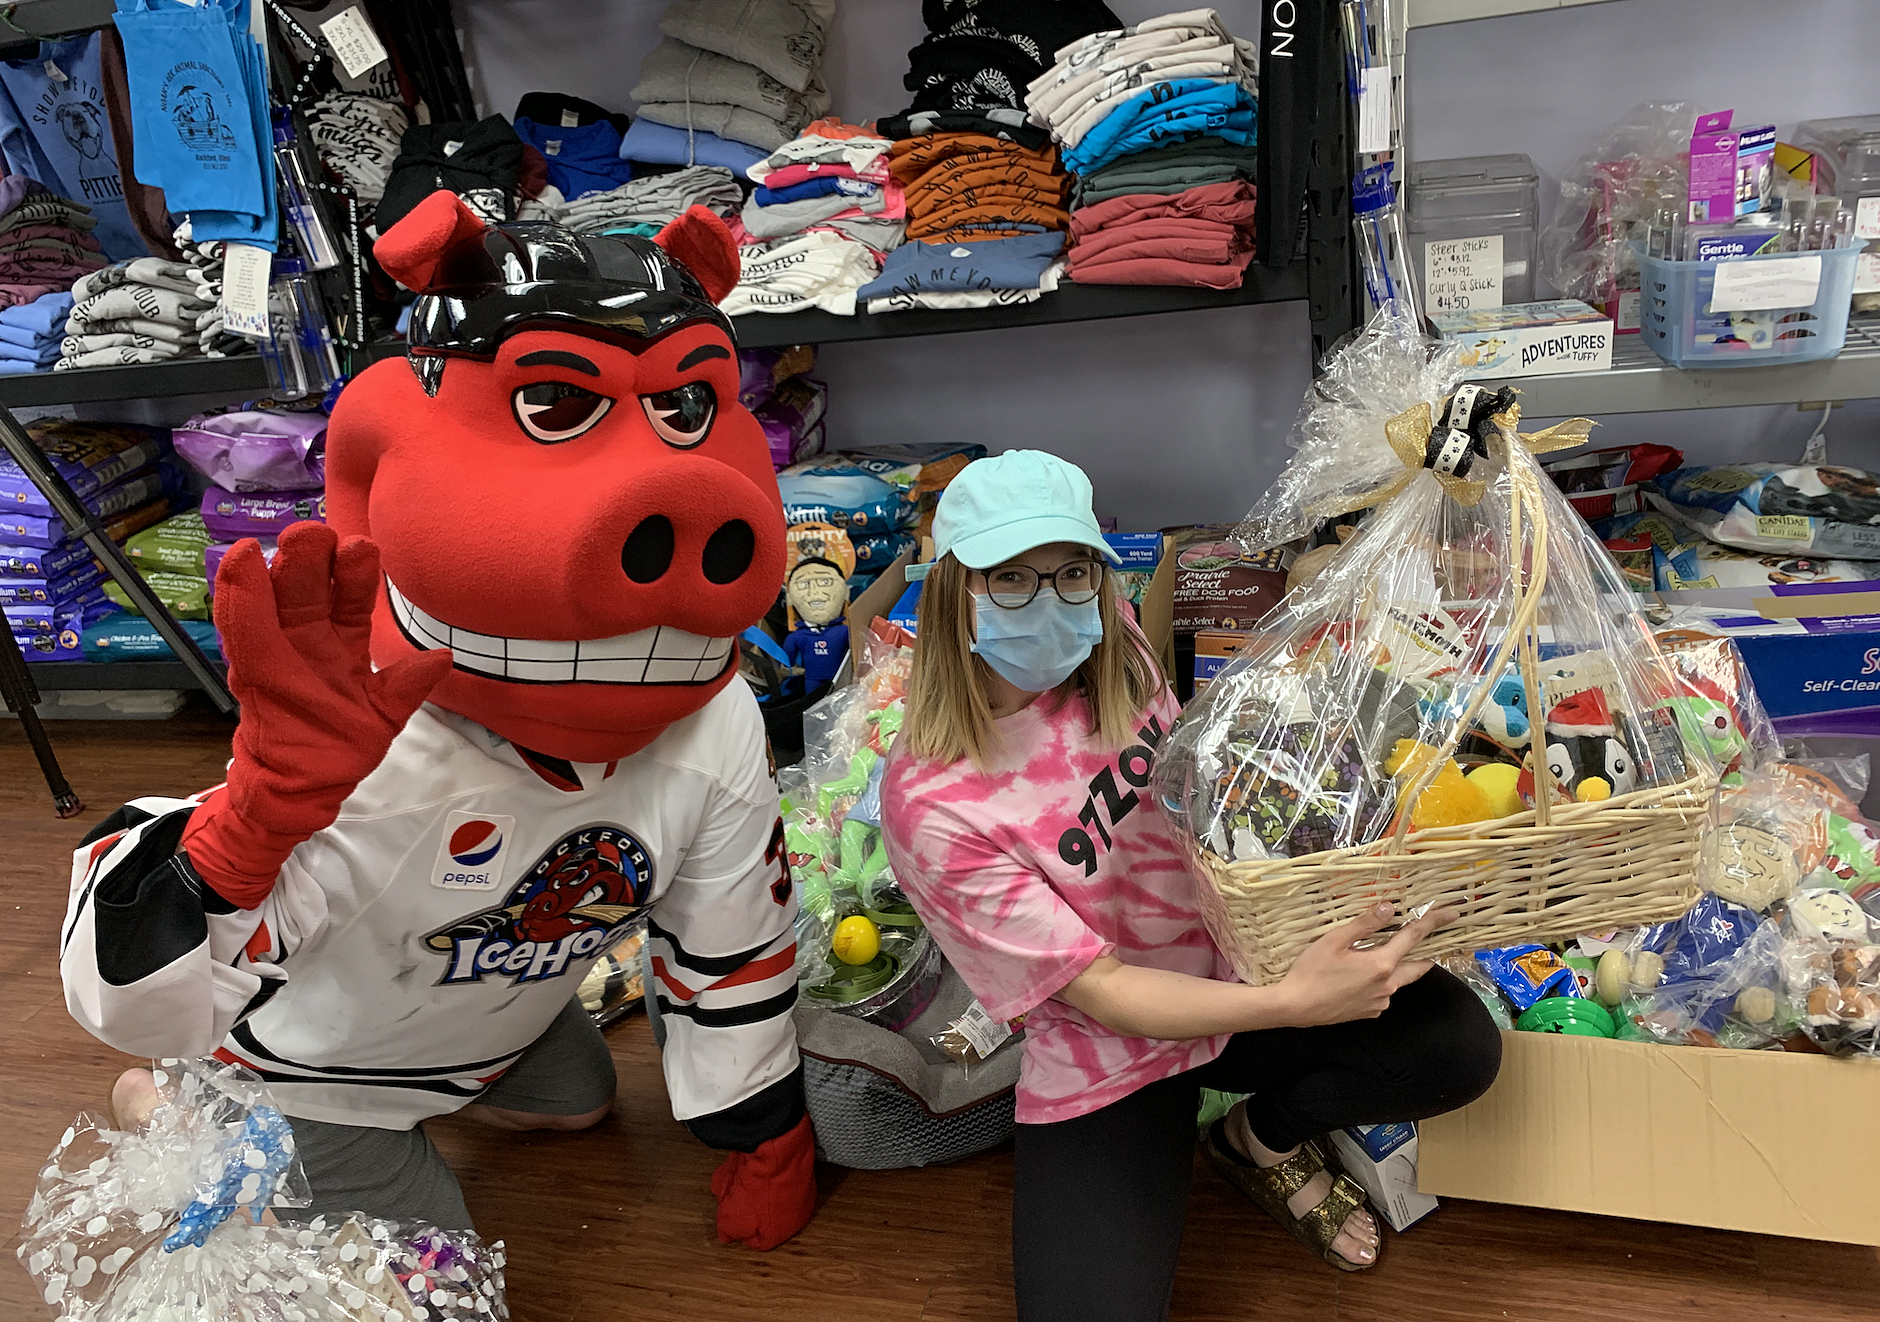 Rockford IceHogs Make A Big Difference In A Super Fan's Life